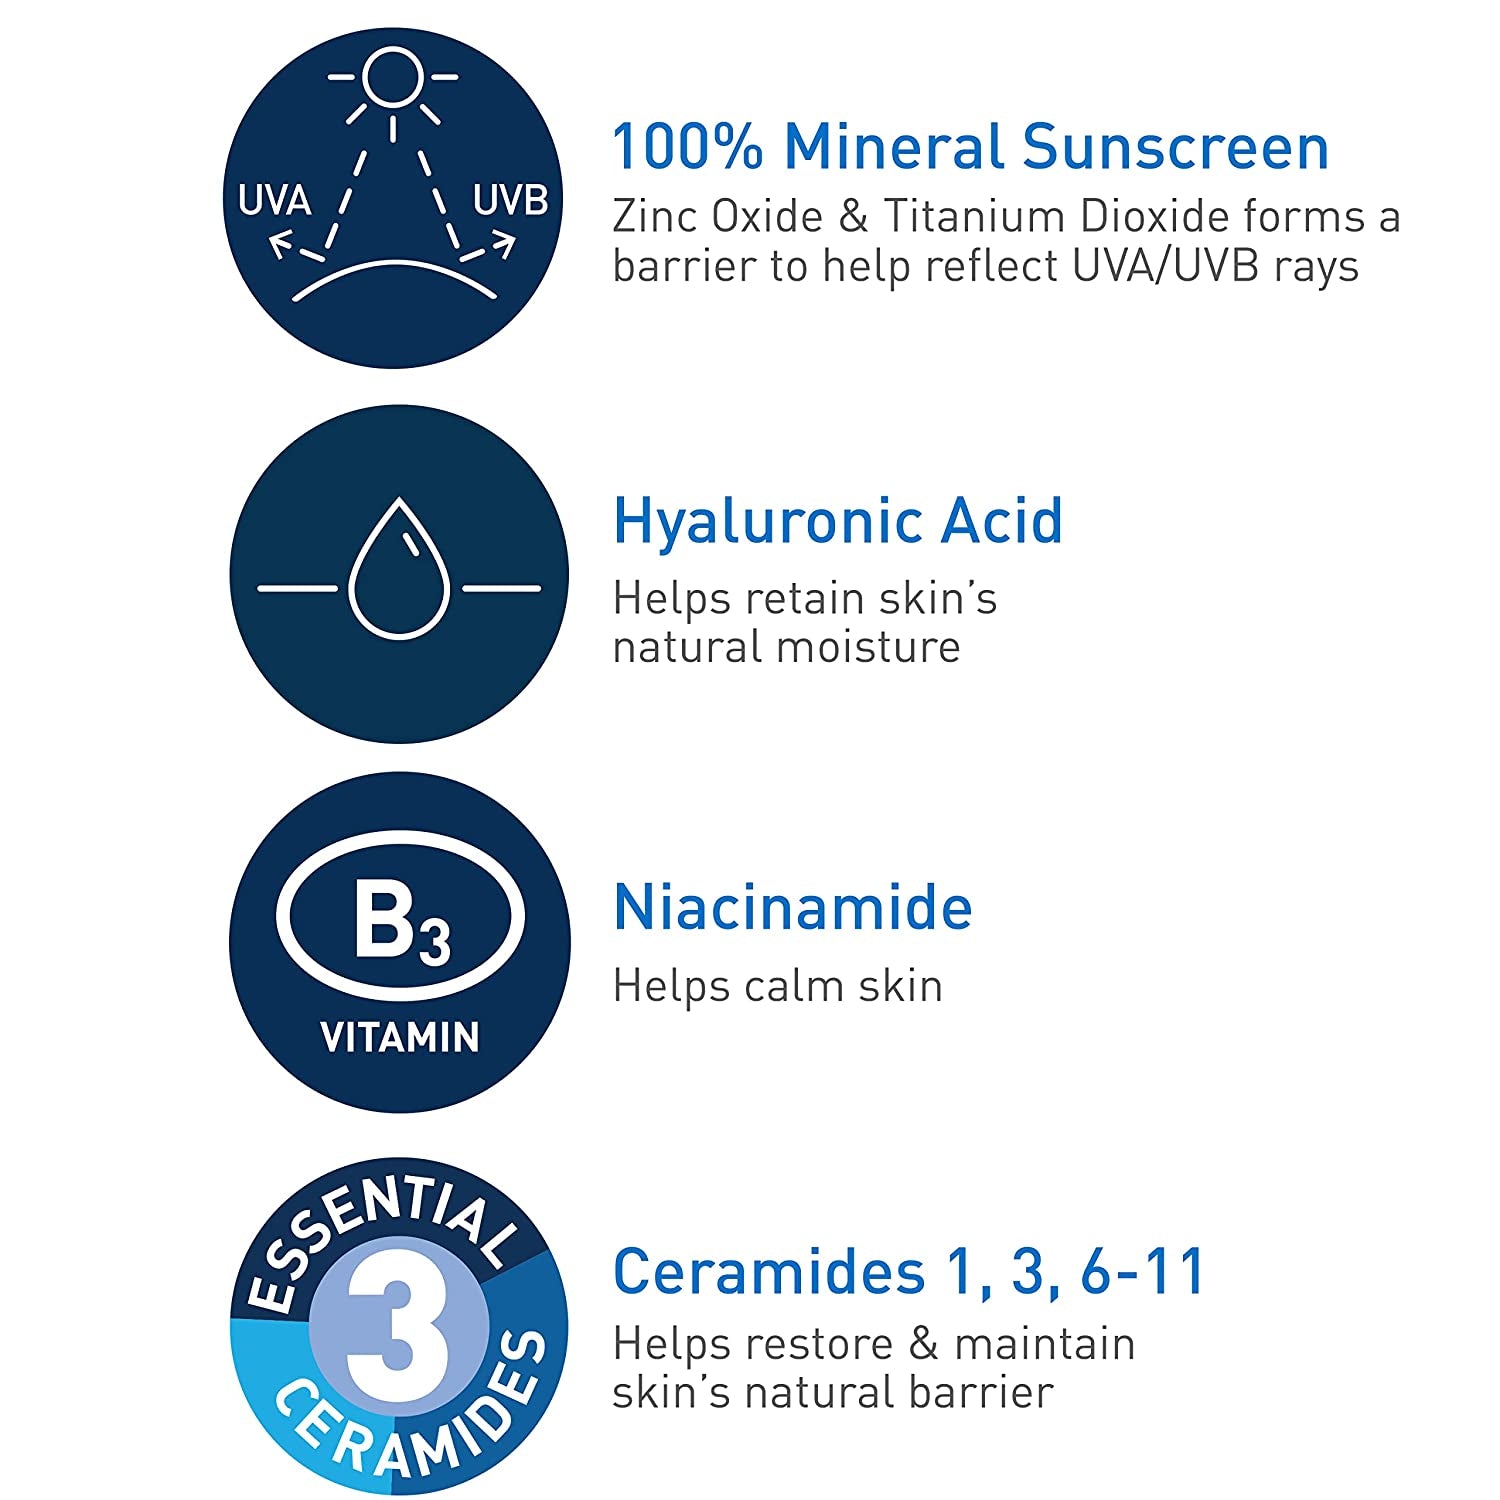 Cerave Tinted Sunscreen with SPF 30 | Hydrating Mineral Sunscreen with Zinc Oxide & Titanium Dioxide | Sheer Tint for Healthy Glow | 1.7 Fluid Ounce